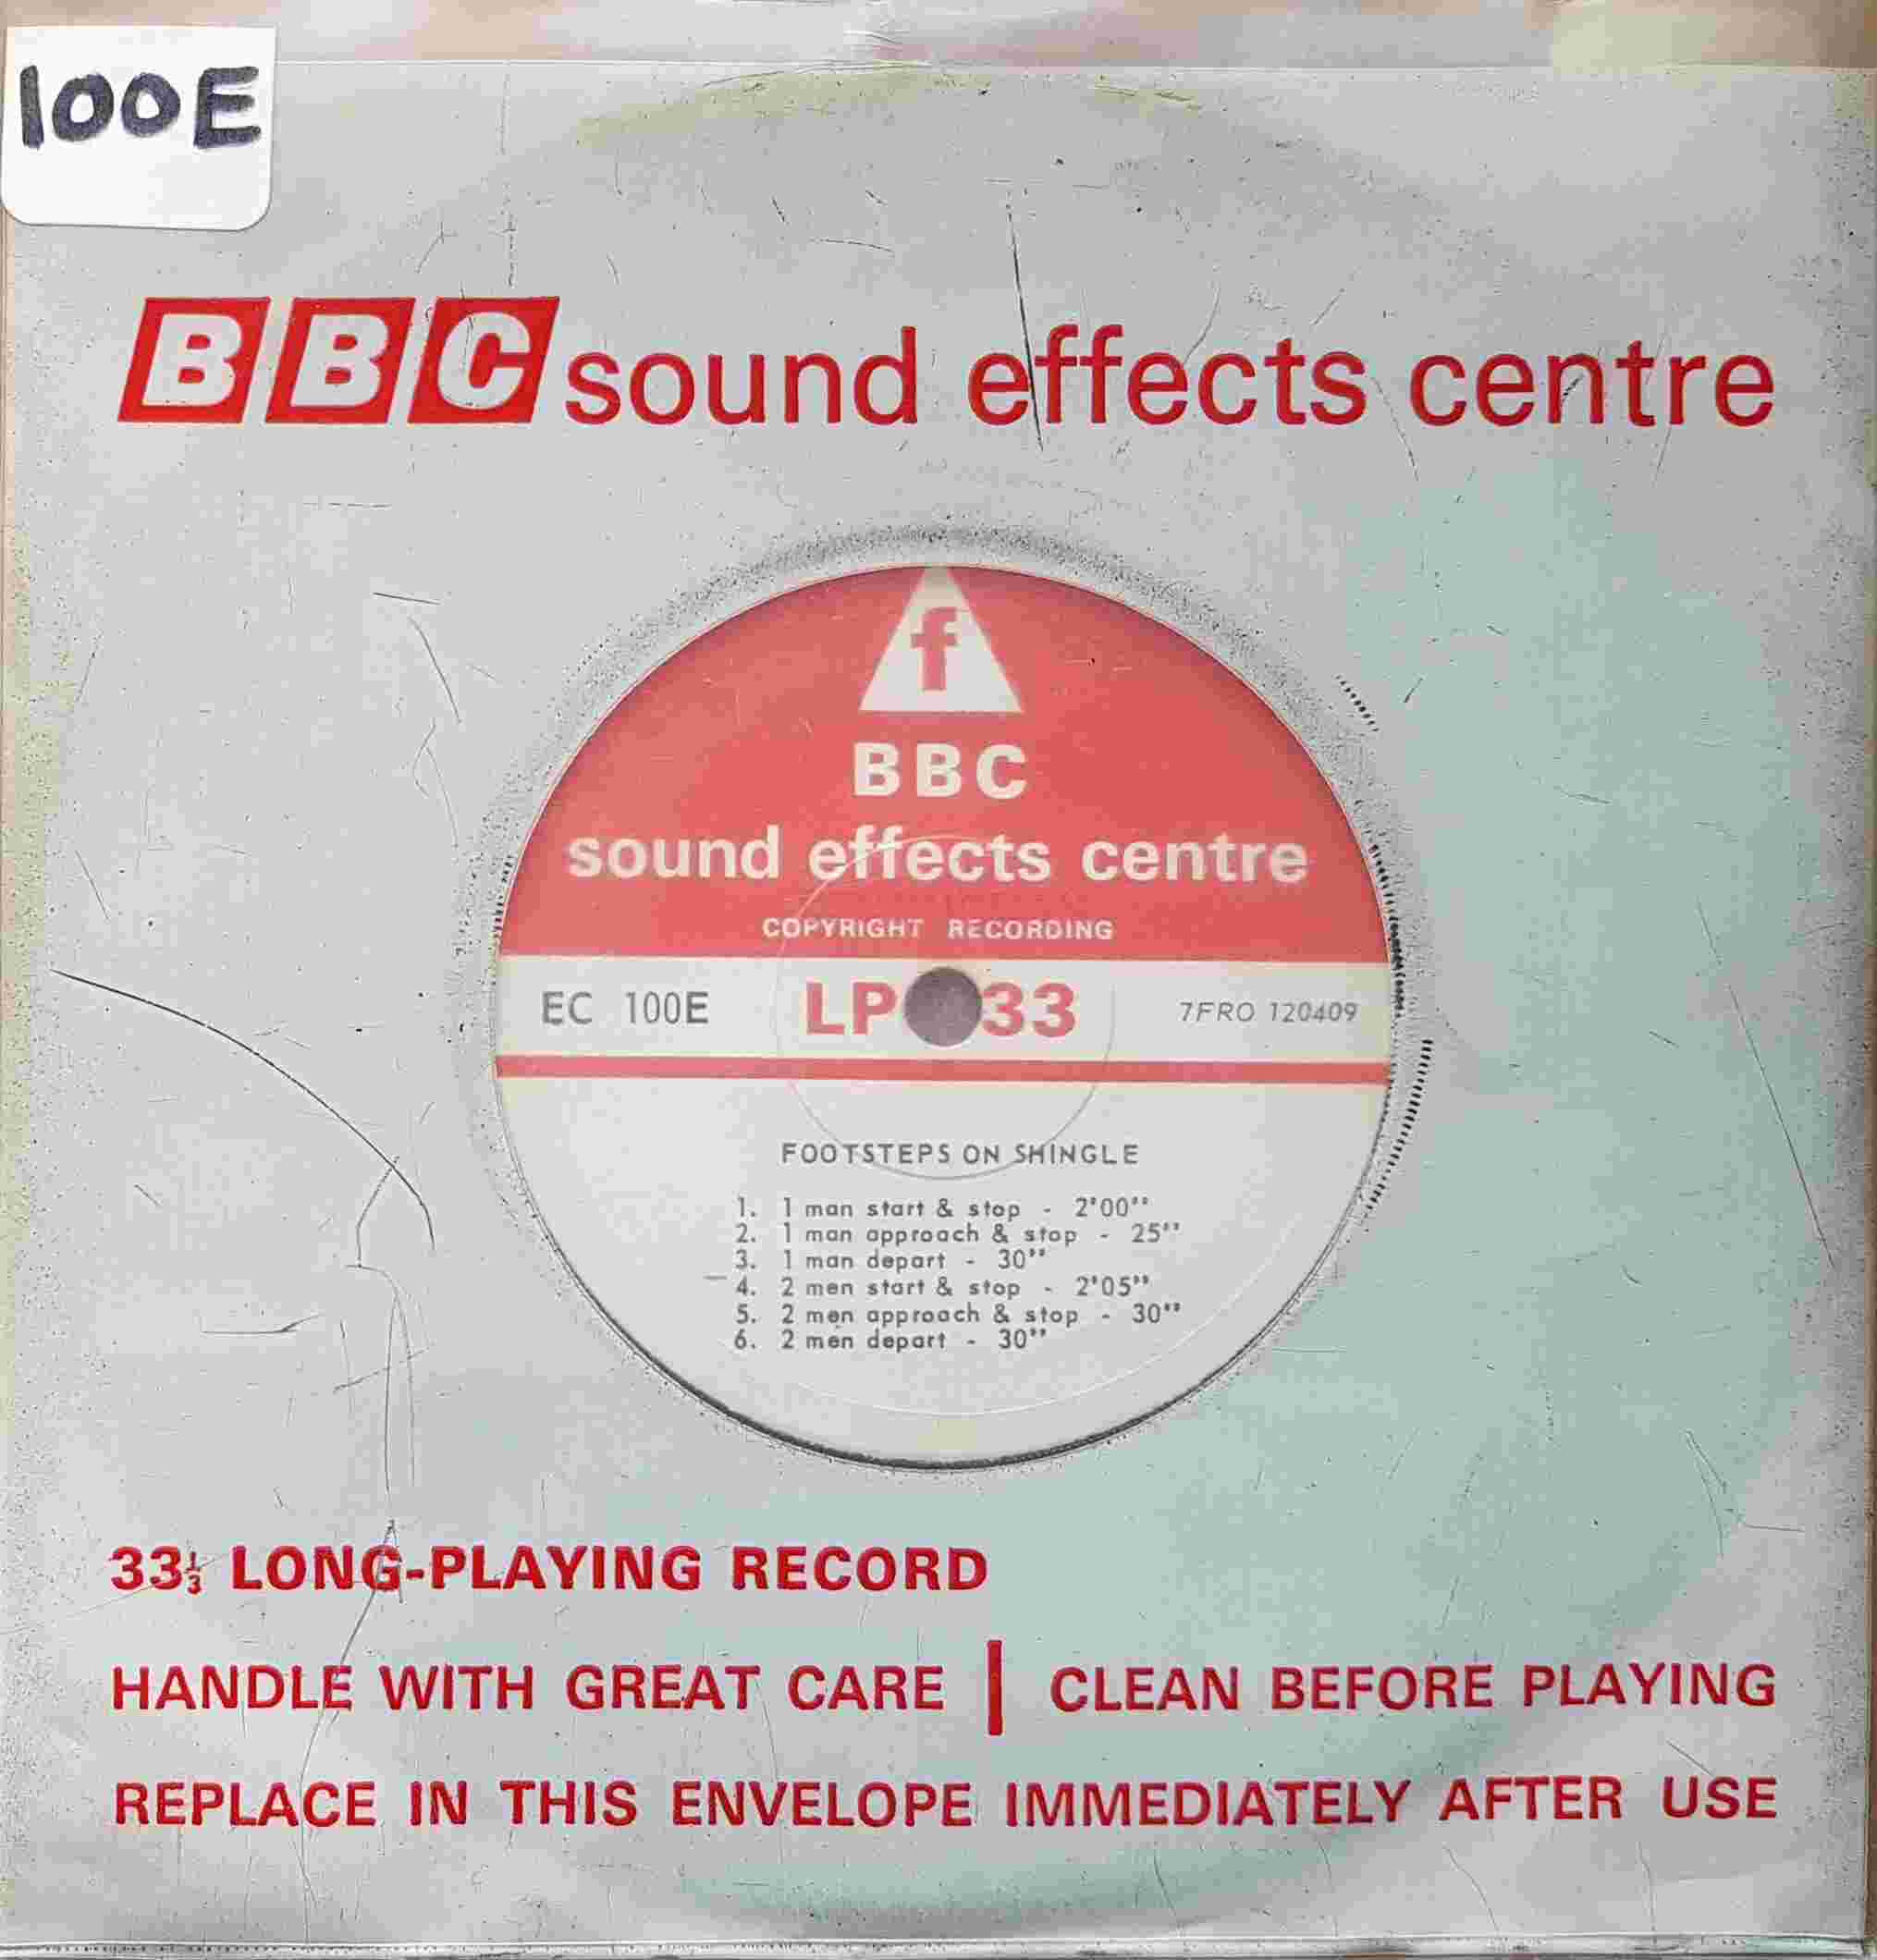 Picture of EC 100E Footsteps by artist Not registered from the BBC records and Tapes library